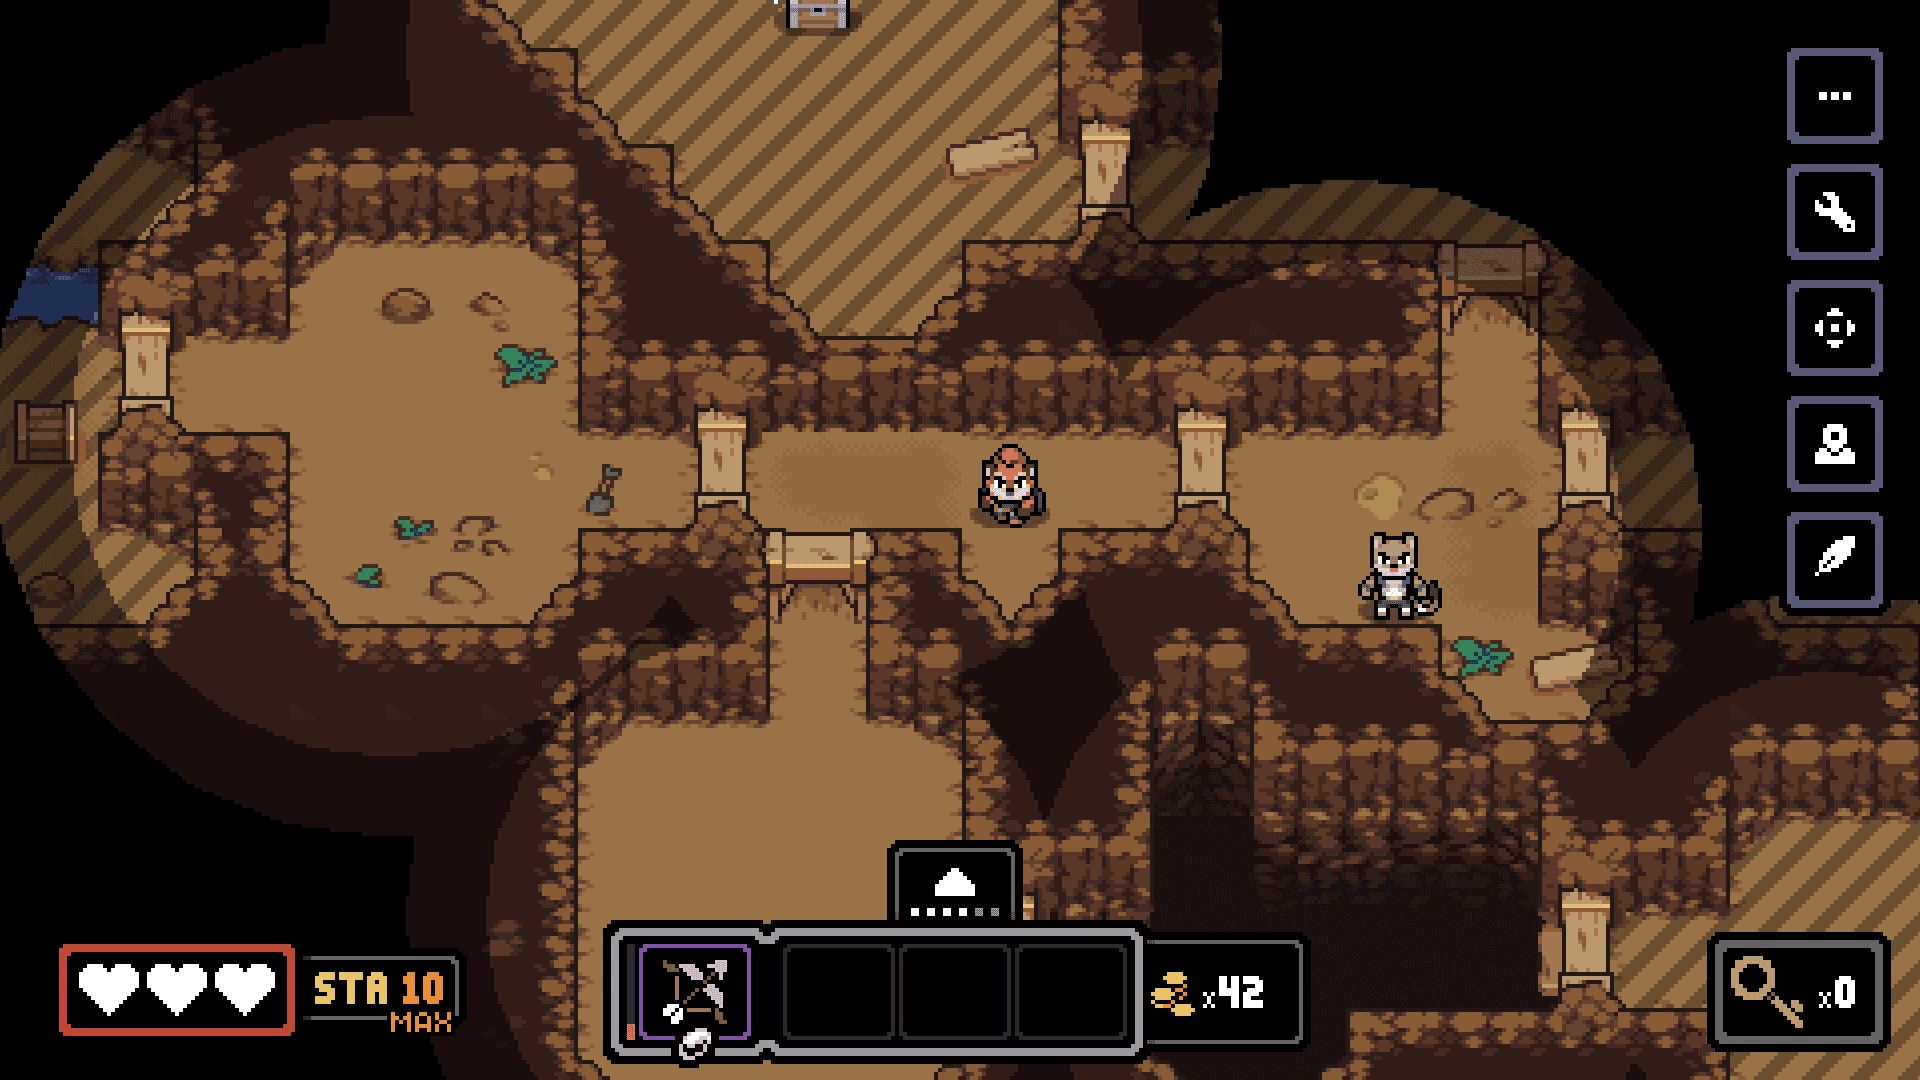 Screenshot 1 of Dungeon dell'etere 